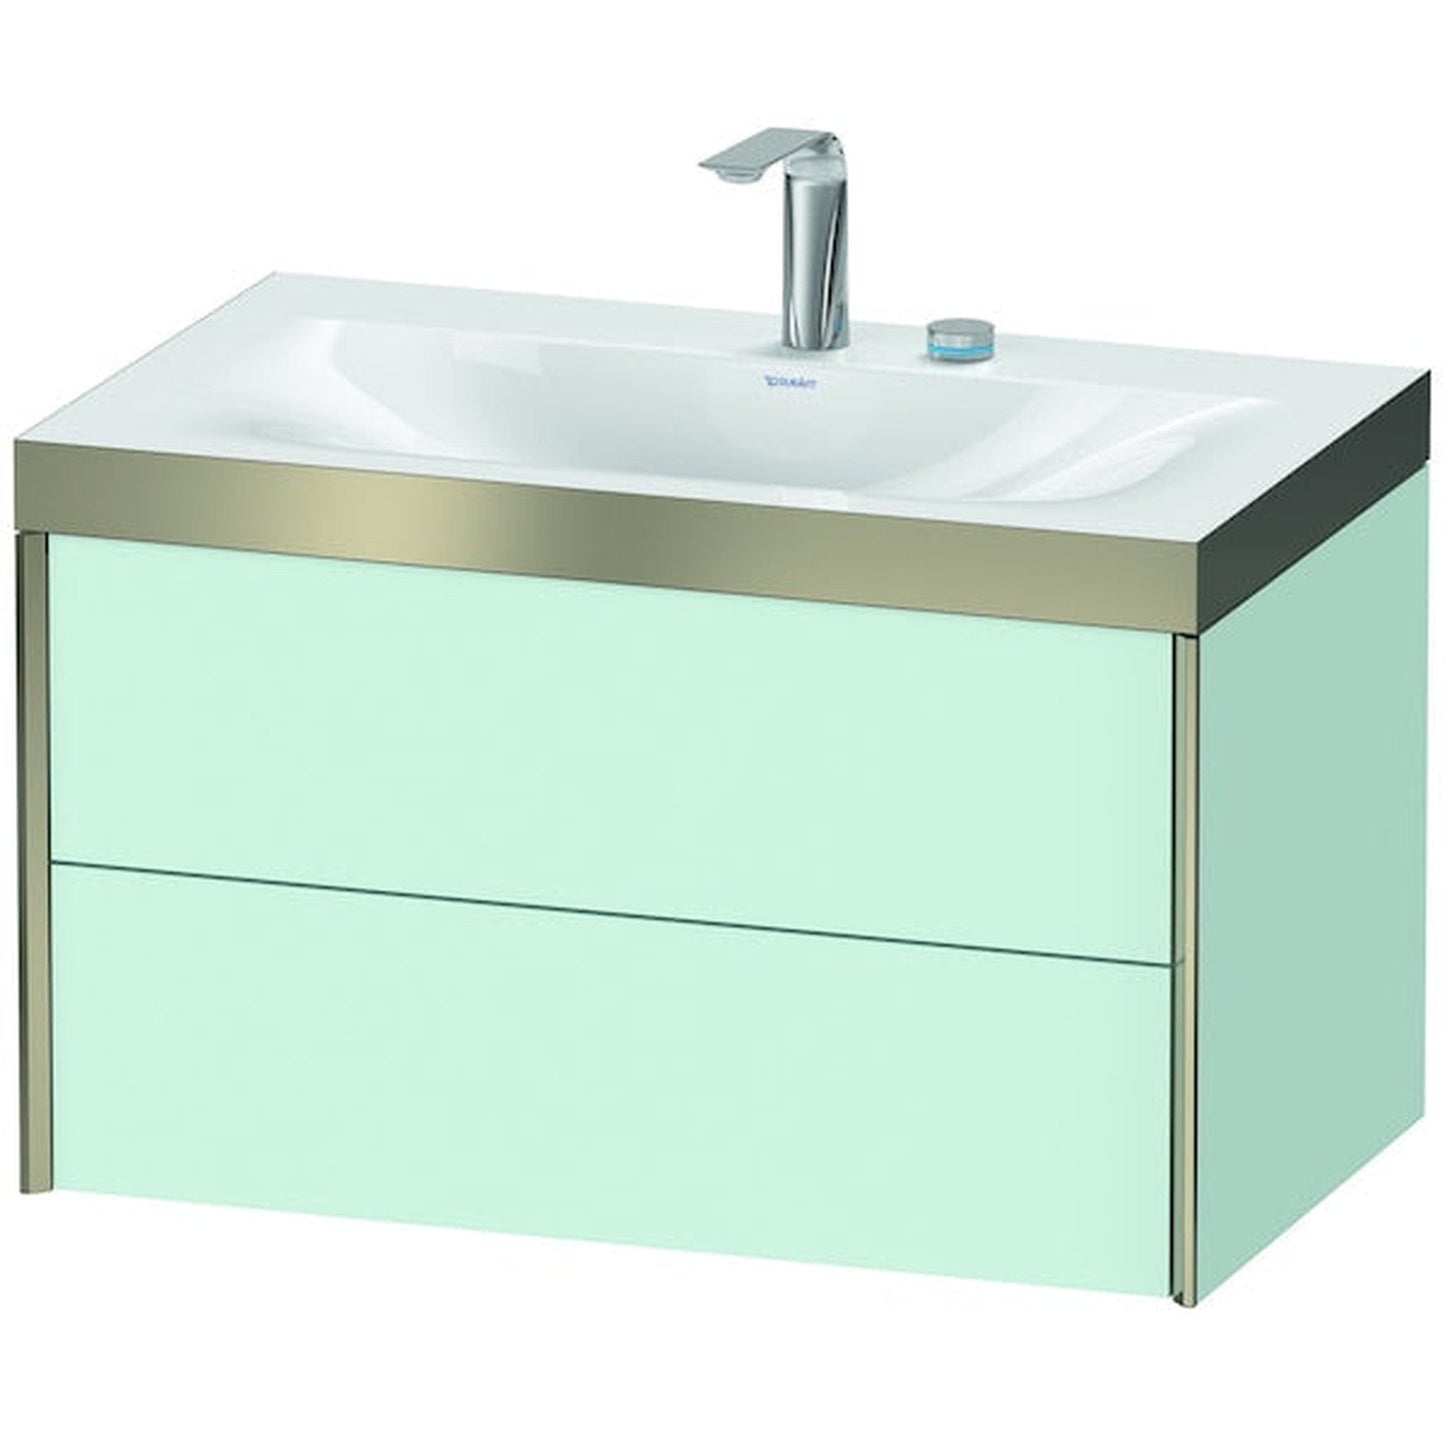 Duravit Xviu 31" x 20" x 19" Two Drawer C-Bonded Wall-Mount Vanity Kit With Two Tap Holes, Light Blue (XV4615EB109P)